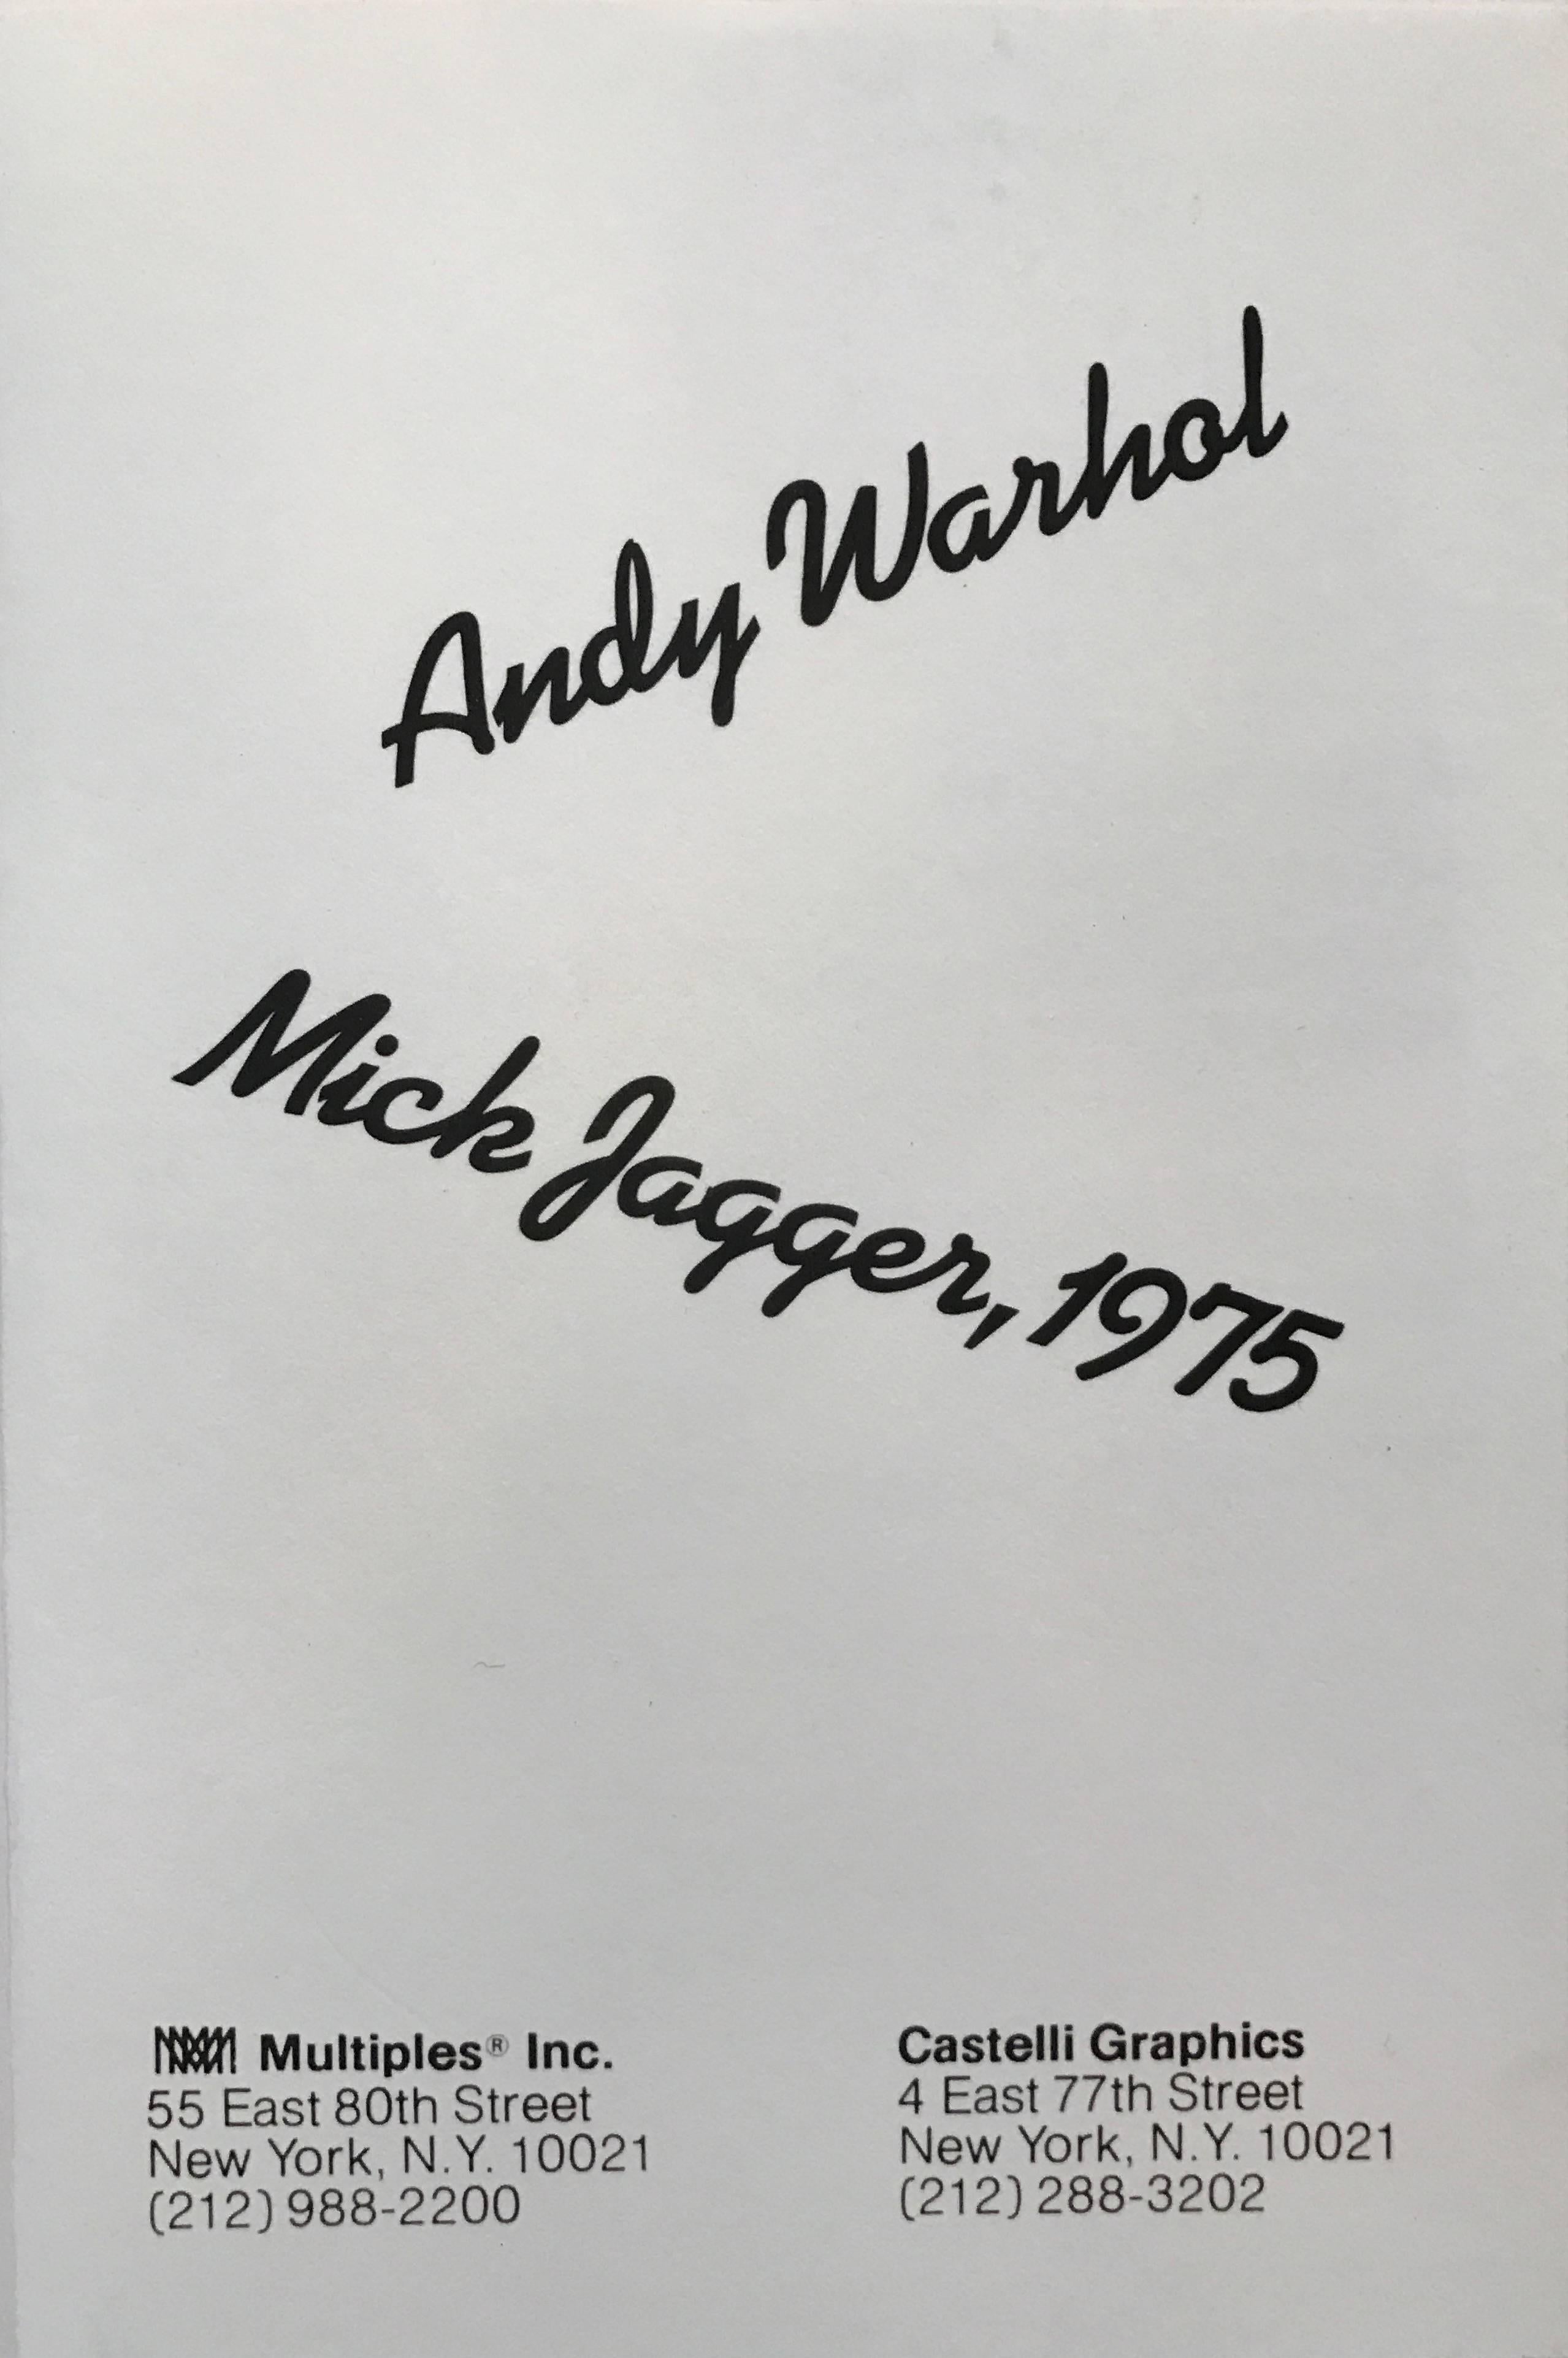 Mick Jagger 1975 - Contemporary Print by (after) Andy Warhol